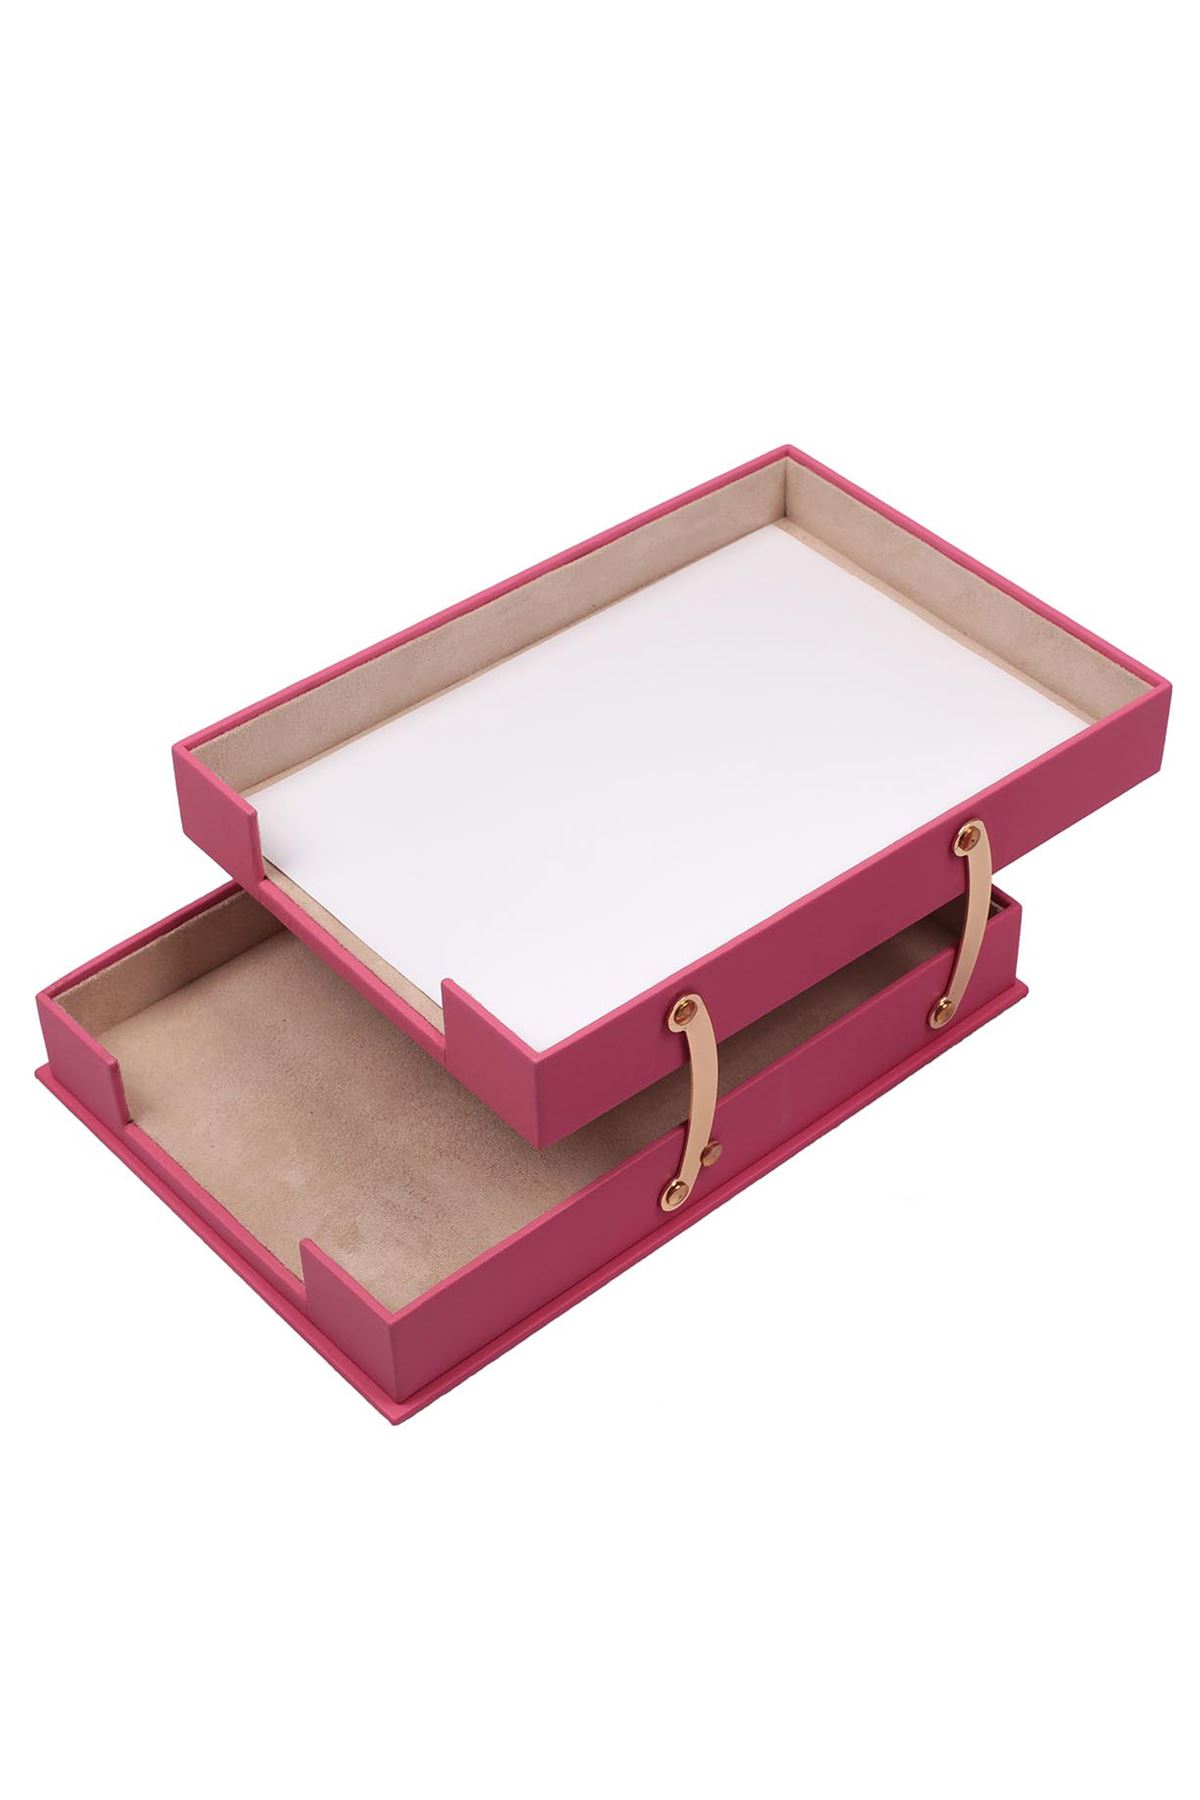 Double Document Tray Pink| Leather Document Organizer | Leather Foldable Tray | Leather Organizer | Double Document Shelves